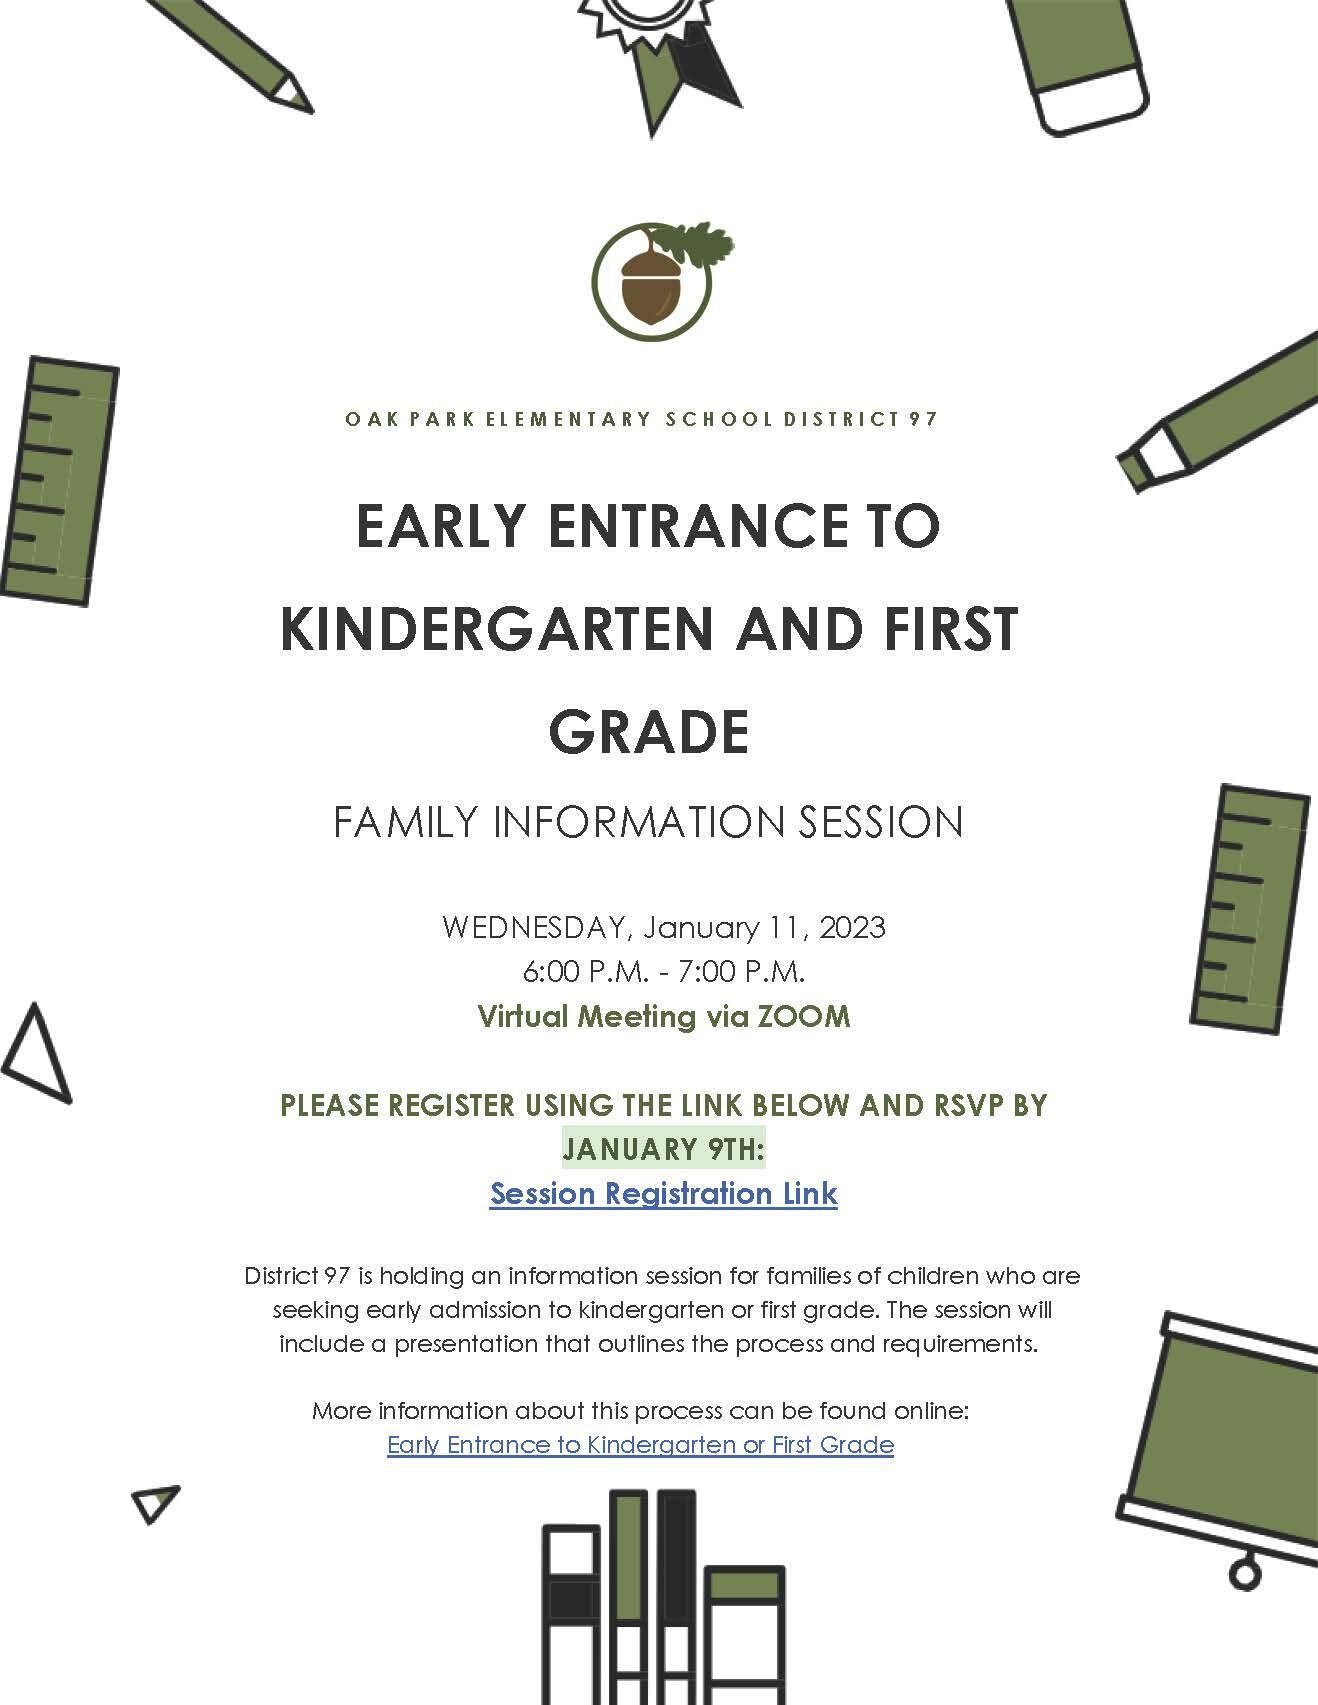 Early Entrance to Kindergarten and First Grade